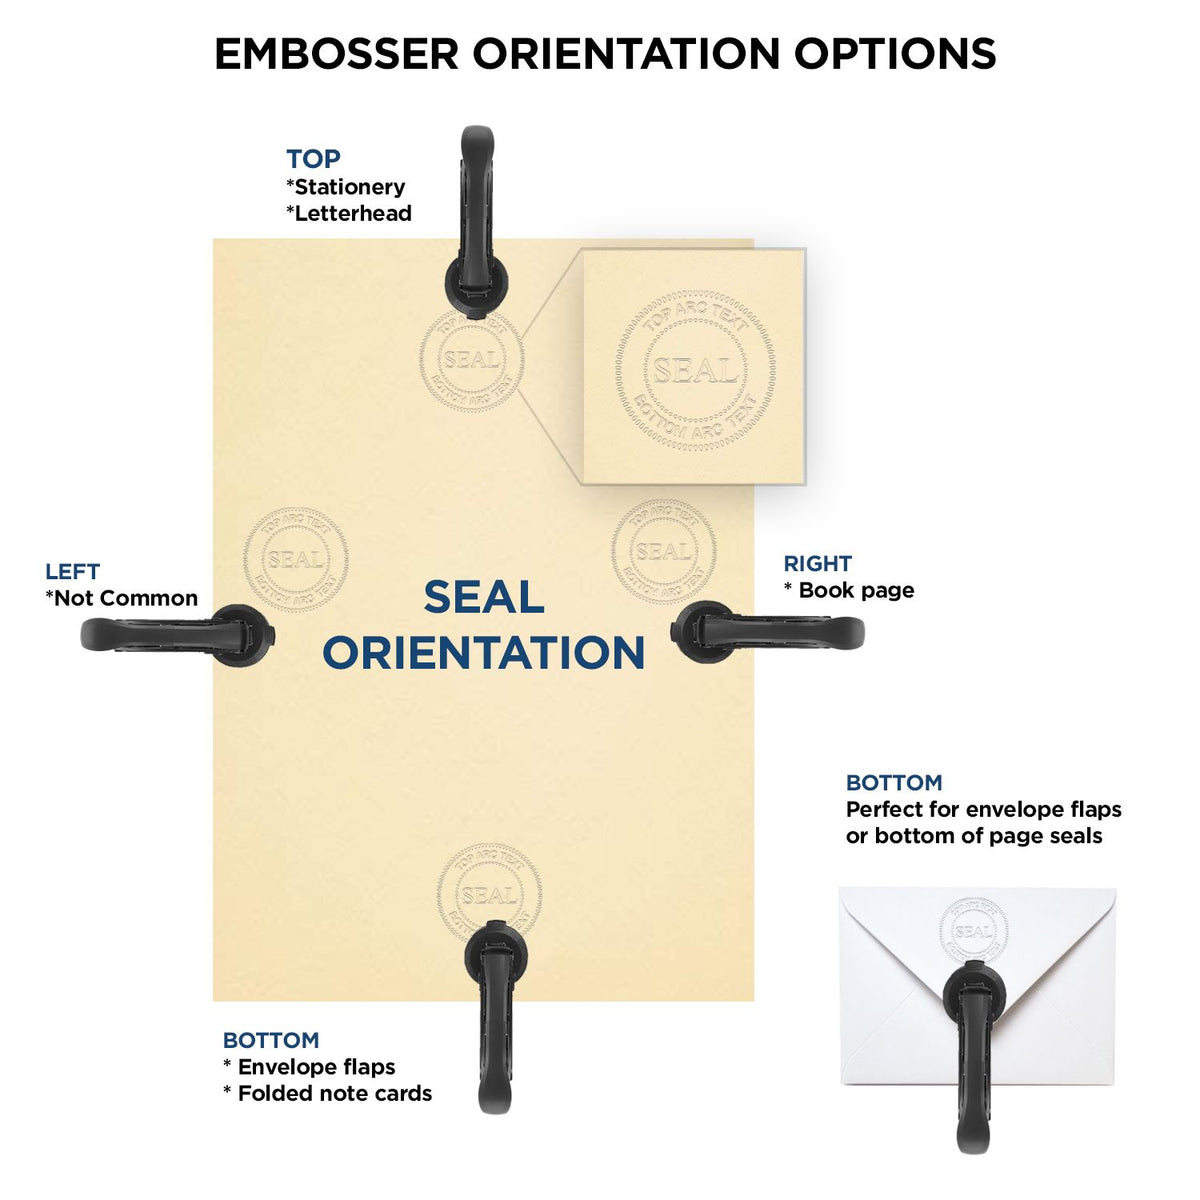 An infographic for the Handheld North Carolina Professional Geologist Embosser showing embosser orientation, this is showing examples of a top, bottom, right and left insert.